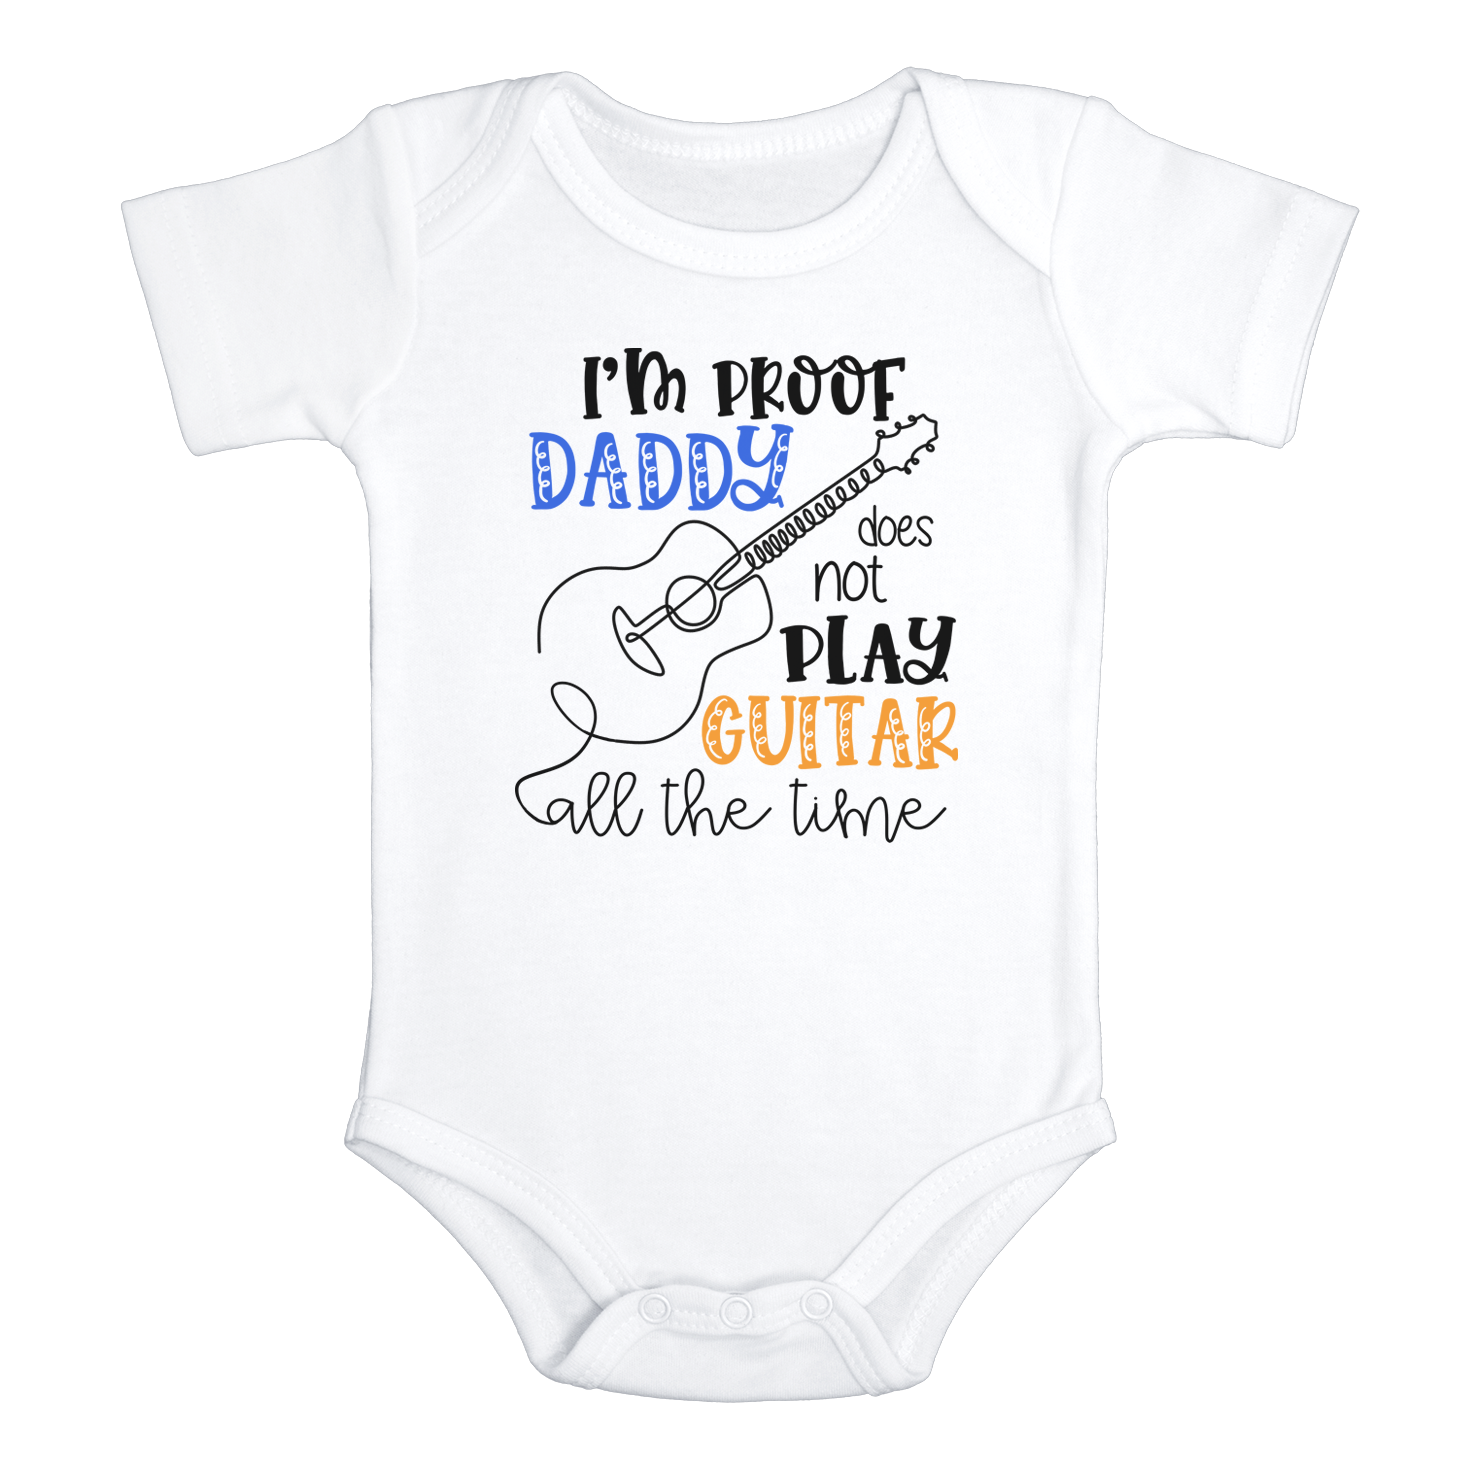 I'M PROOF DADDY DOES NOT PLAY GUITAR ALL THE TIME Funny baby onesies gamer bodysuit - HappyAddition